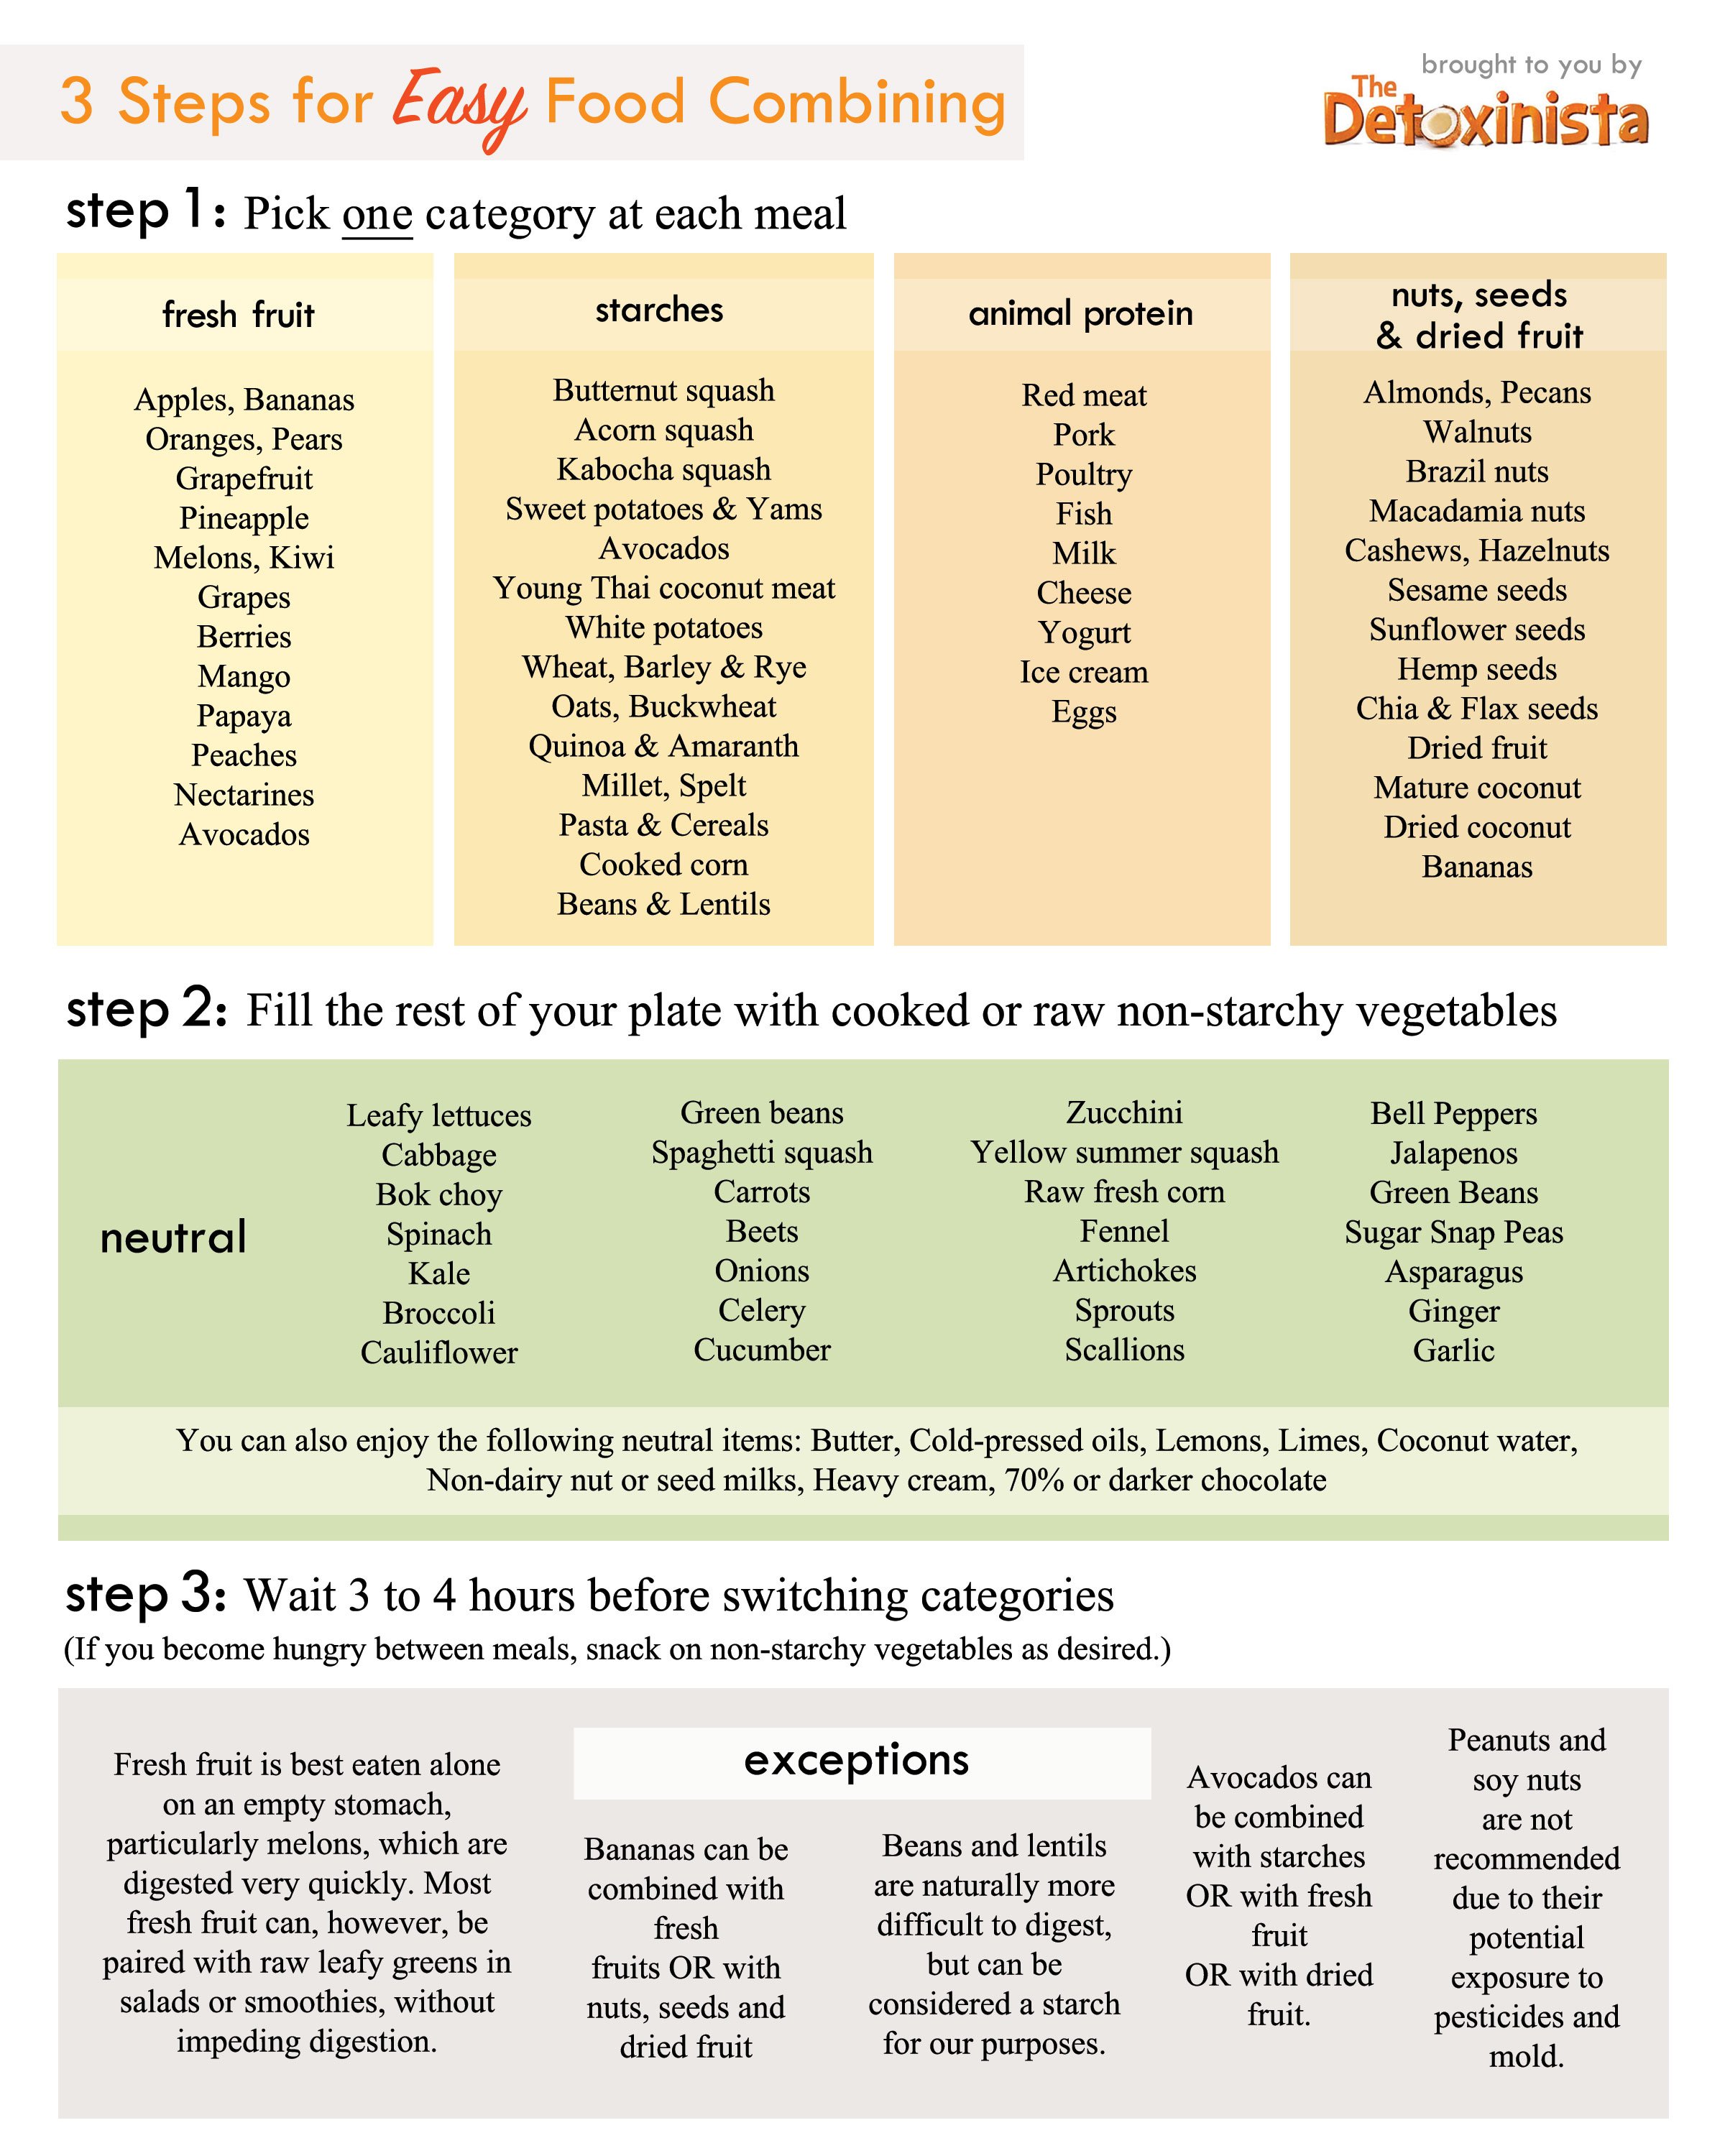 food combining chart showing you how to properly combine foods